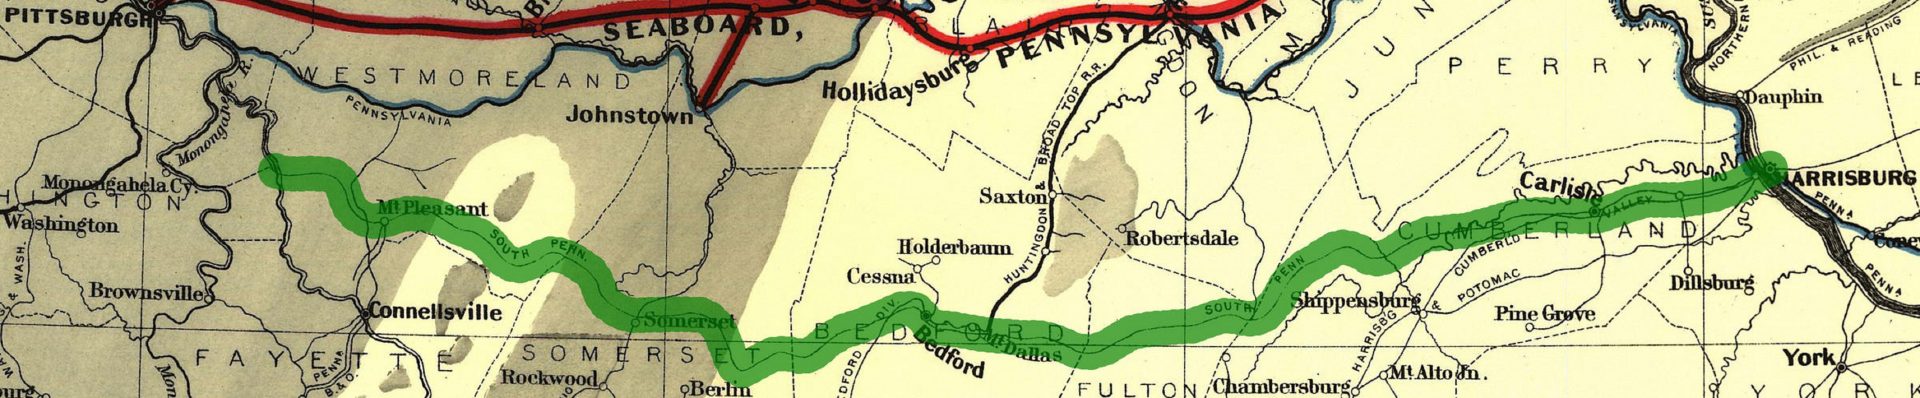 The never-completed South Pennsylvania Railroad route cropped from an 1884 map of proposed rail lines.